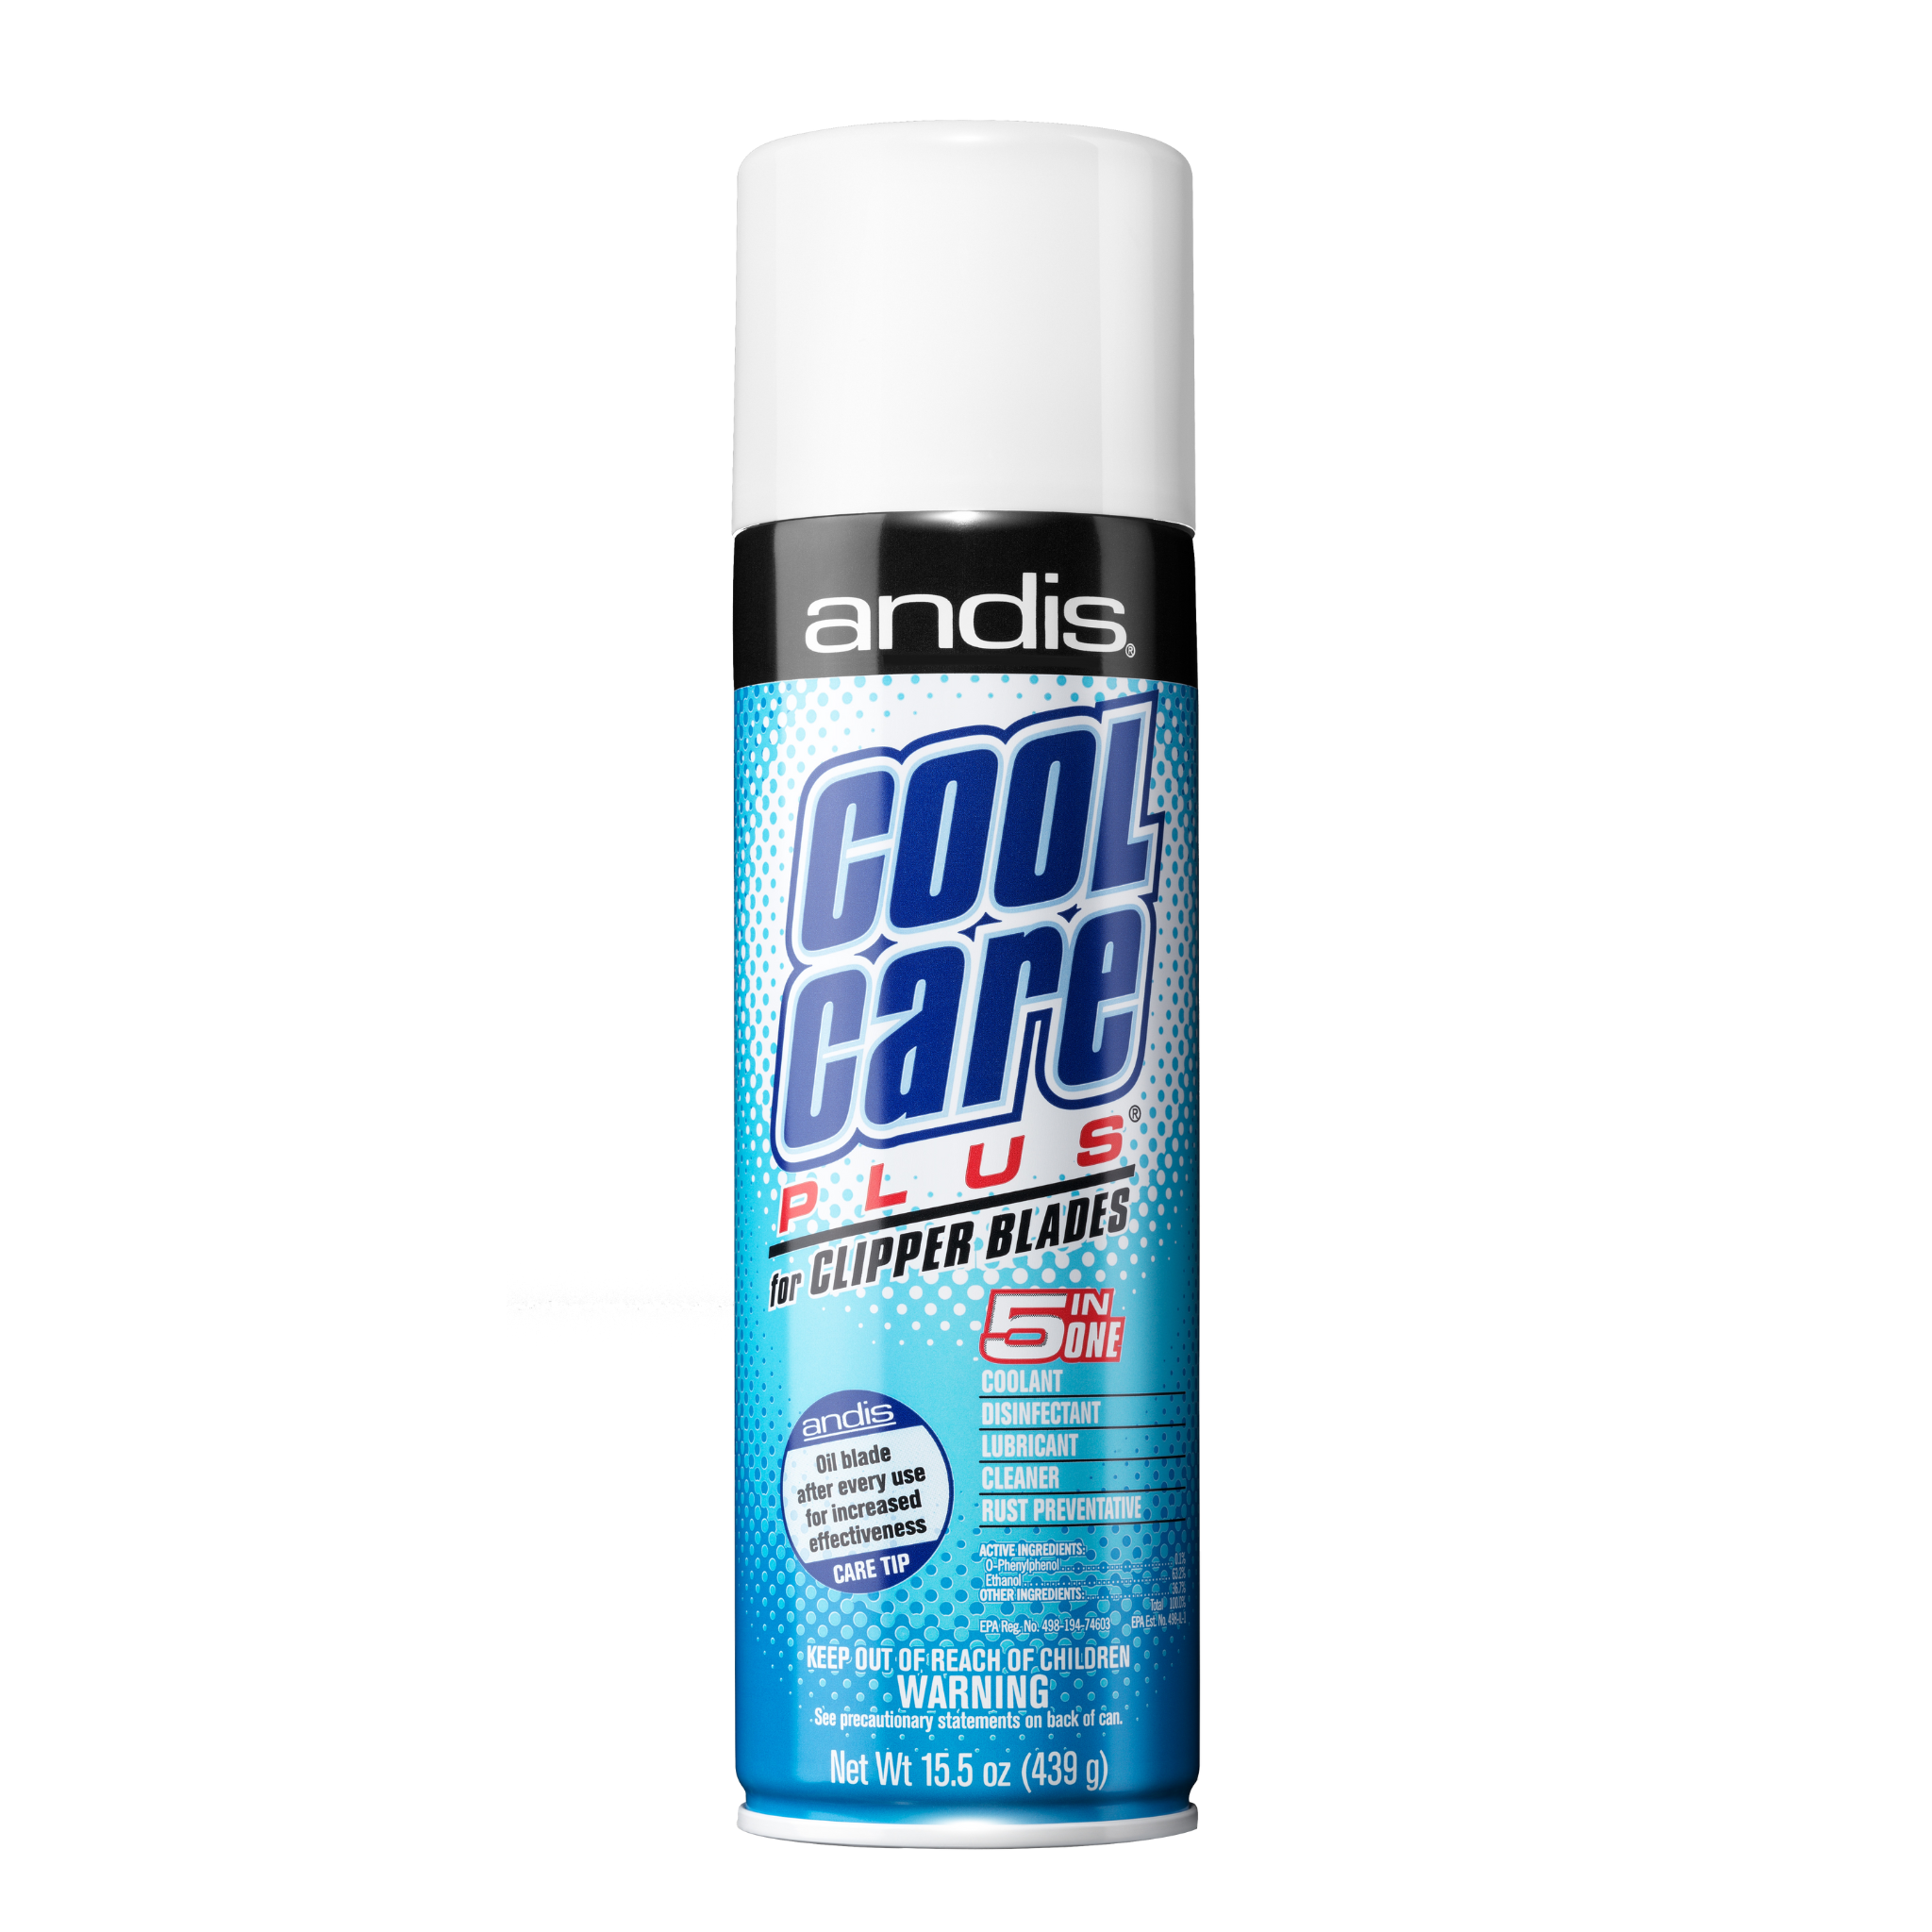 Andis Blade Care plus jar + 5-in-1 Cool Care Plus Spray Combo